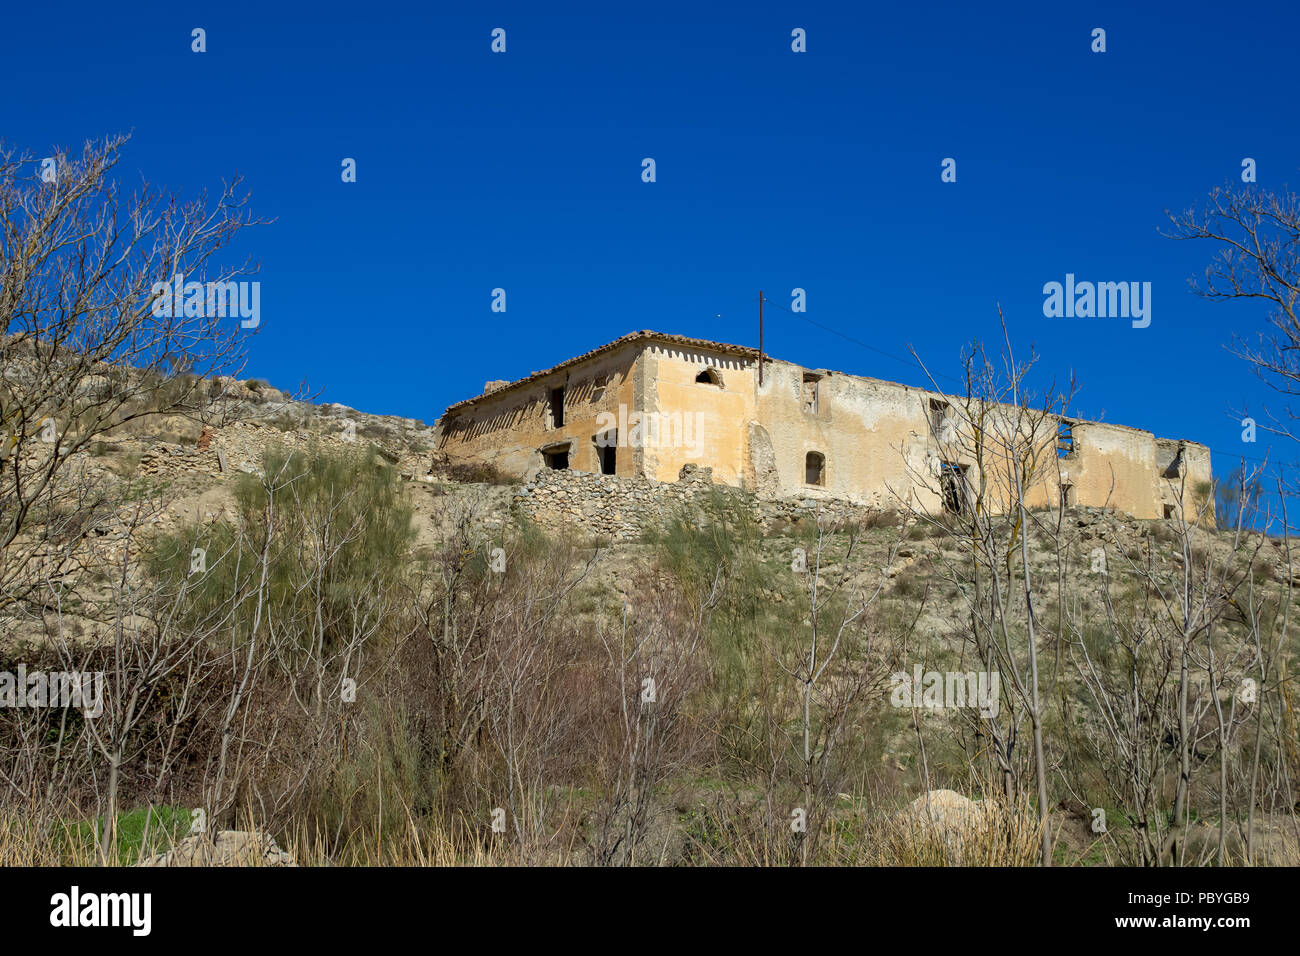 Empty Abandoned House in Rural Spain Stock Photo